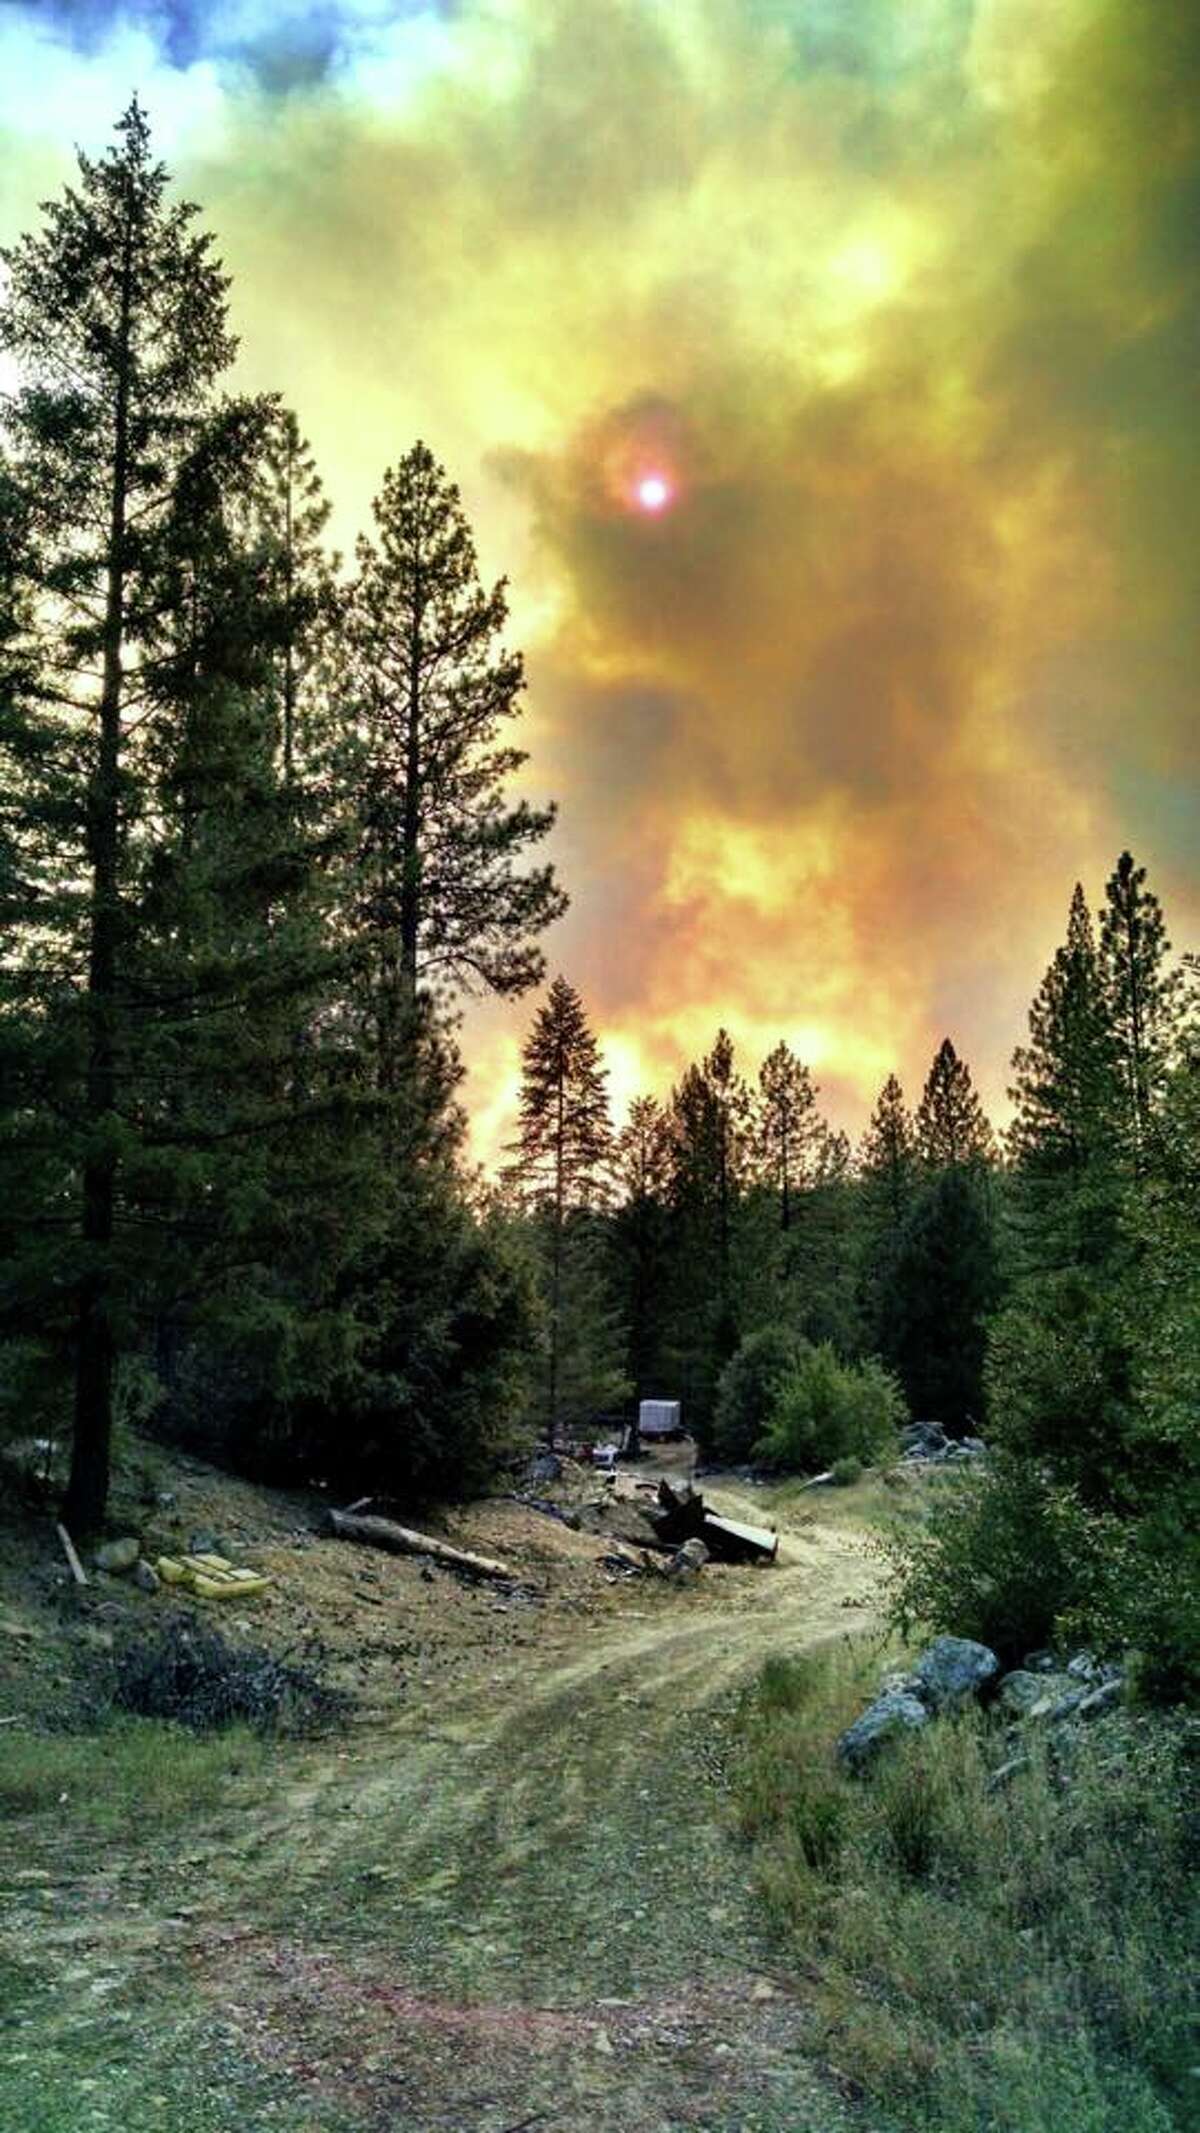 The Lowell Fire in Nevada County had burned 1,700 acres by Monday morning.